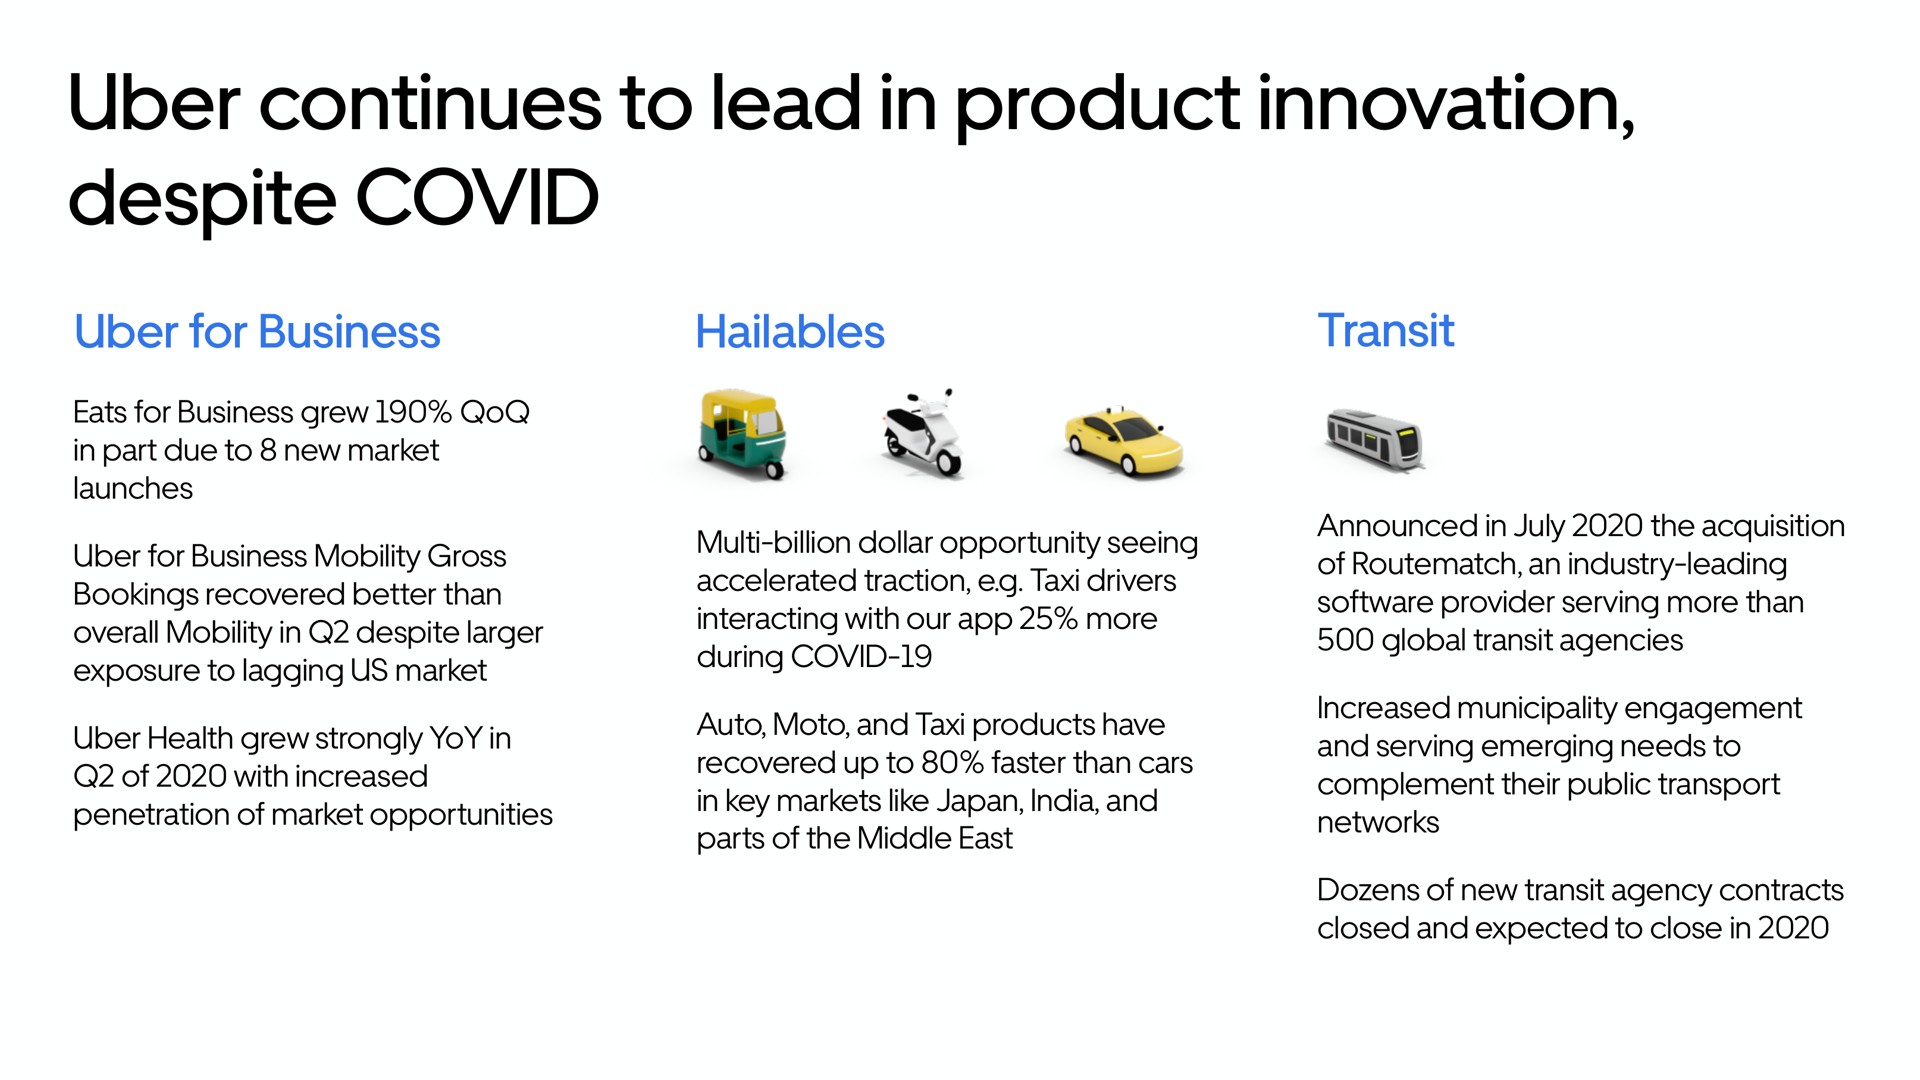 continues to lead in product innovation despite covid | Uber